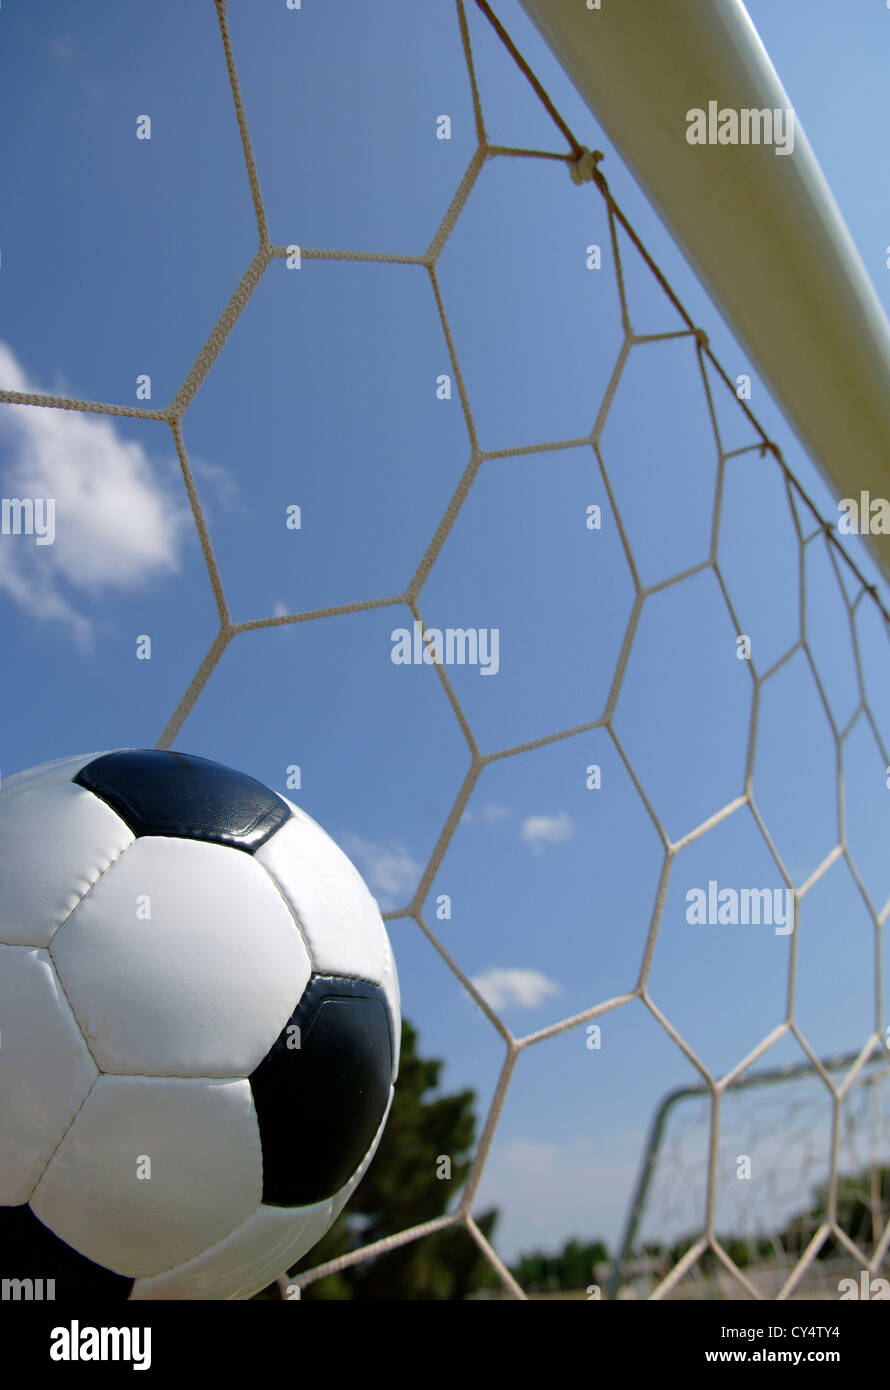 Soccer ball in goal with blue sky background Stock Photo